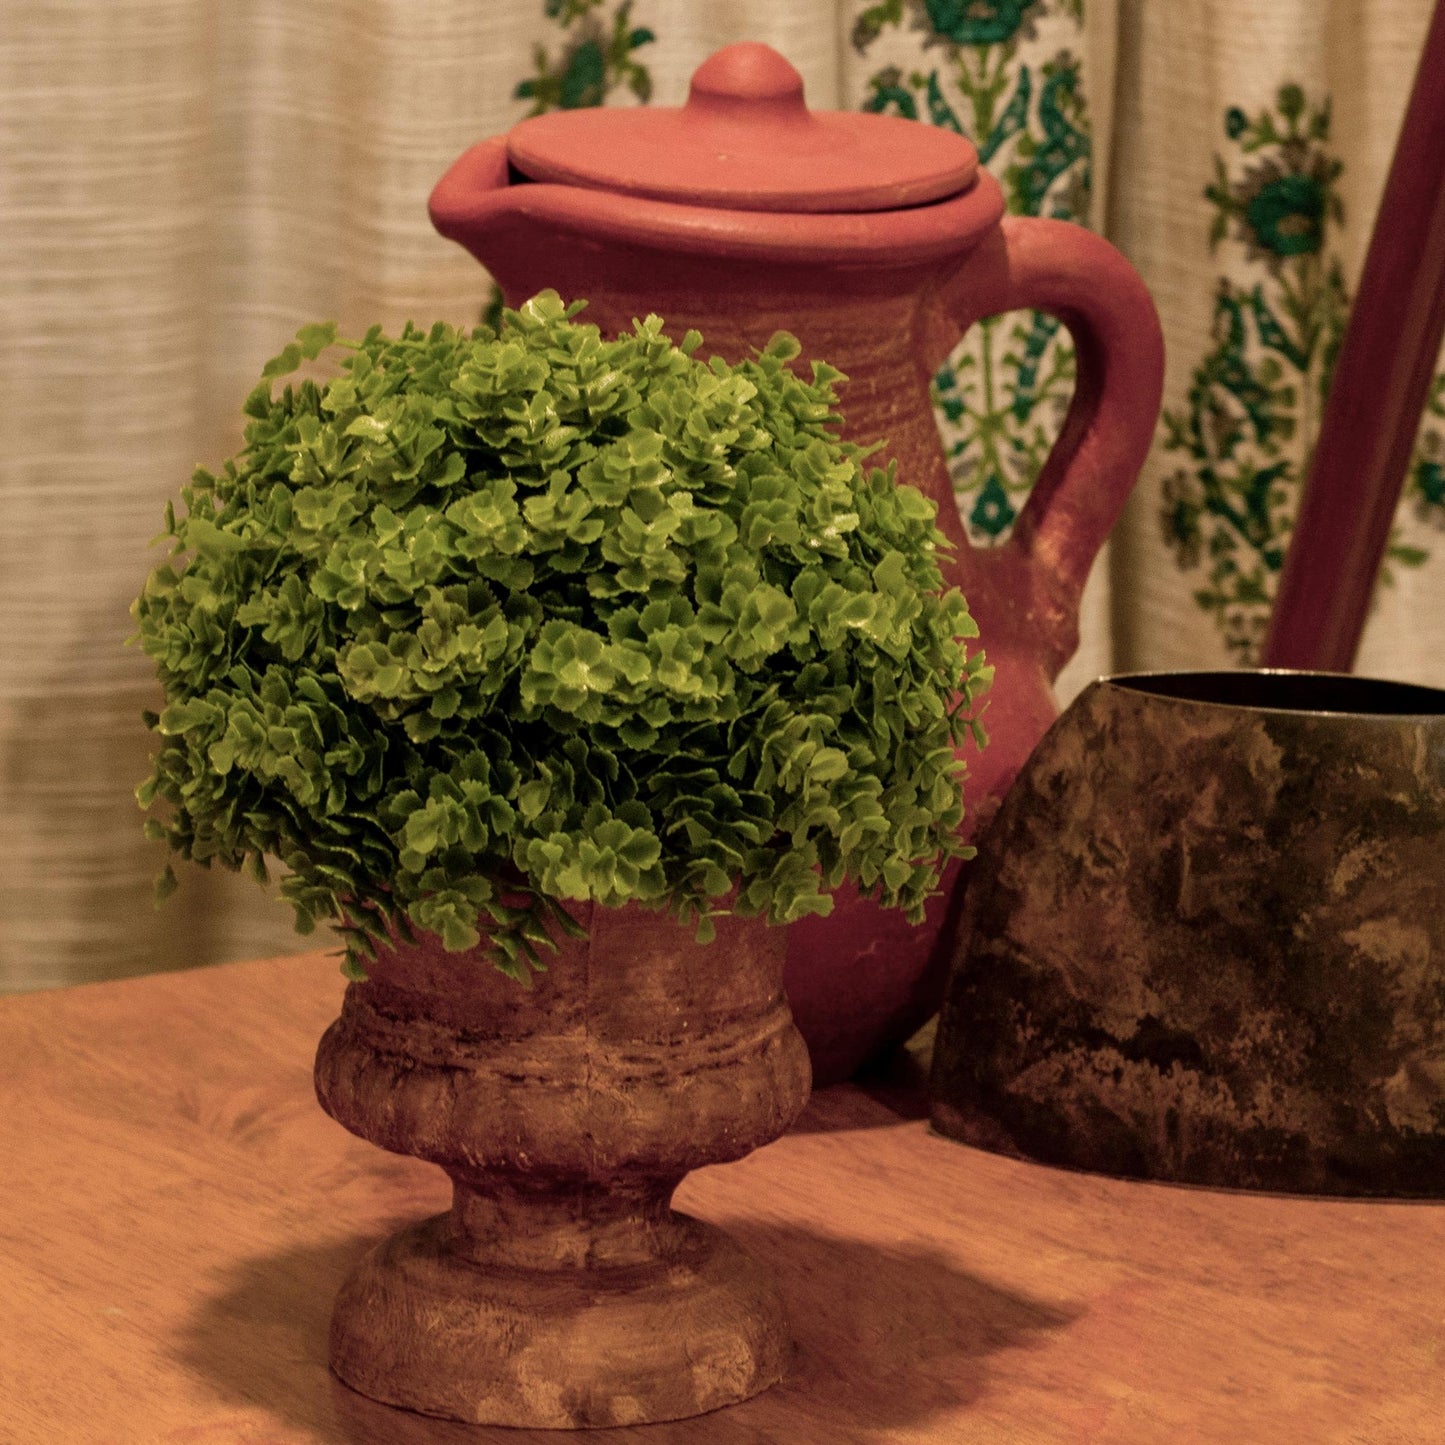 Artificial Shrub With Wooden Textured Pot